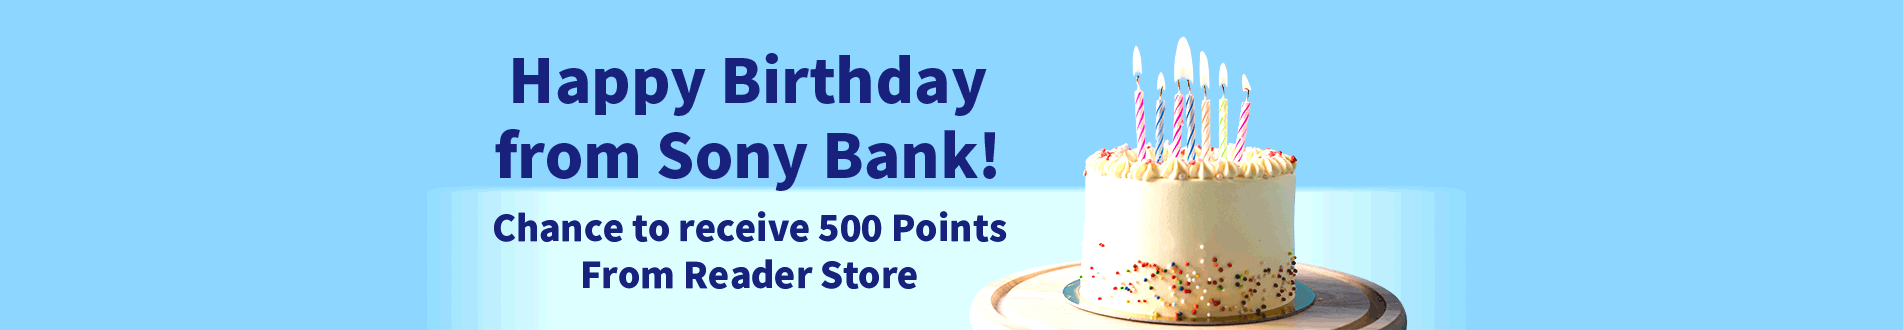 Happy Birthday from Sony Bank! Chance to receive 500 Points From Reader Store